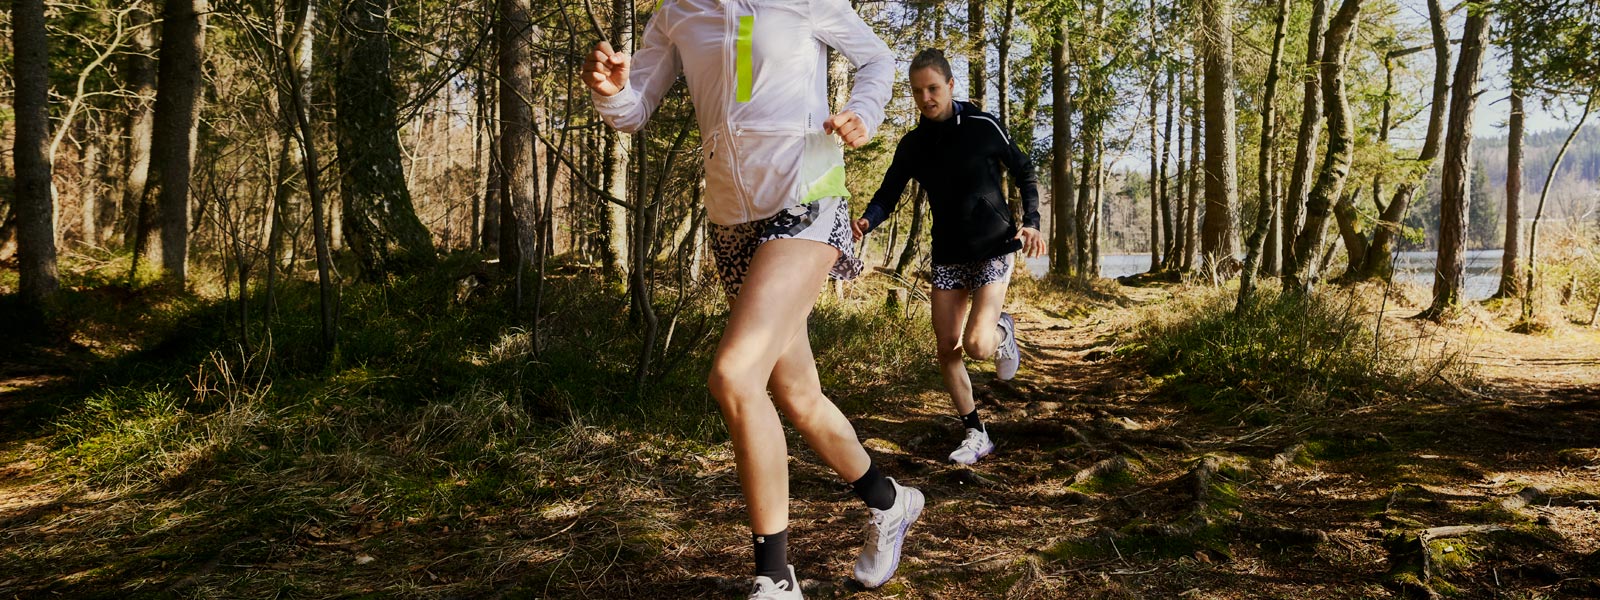 Two runners run a small lake over a forest floor with many roots in the background